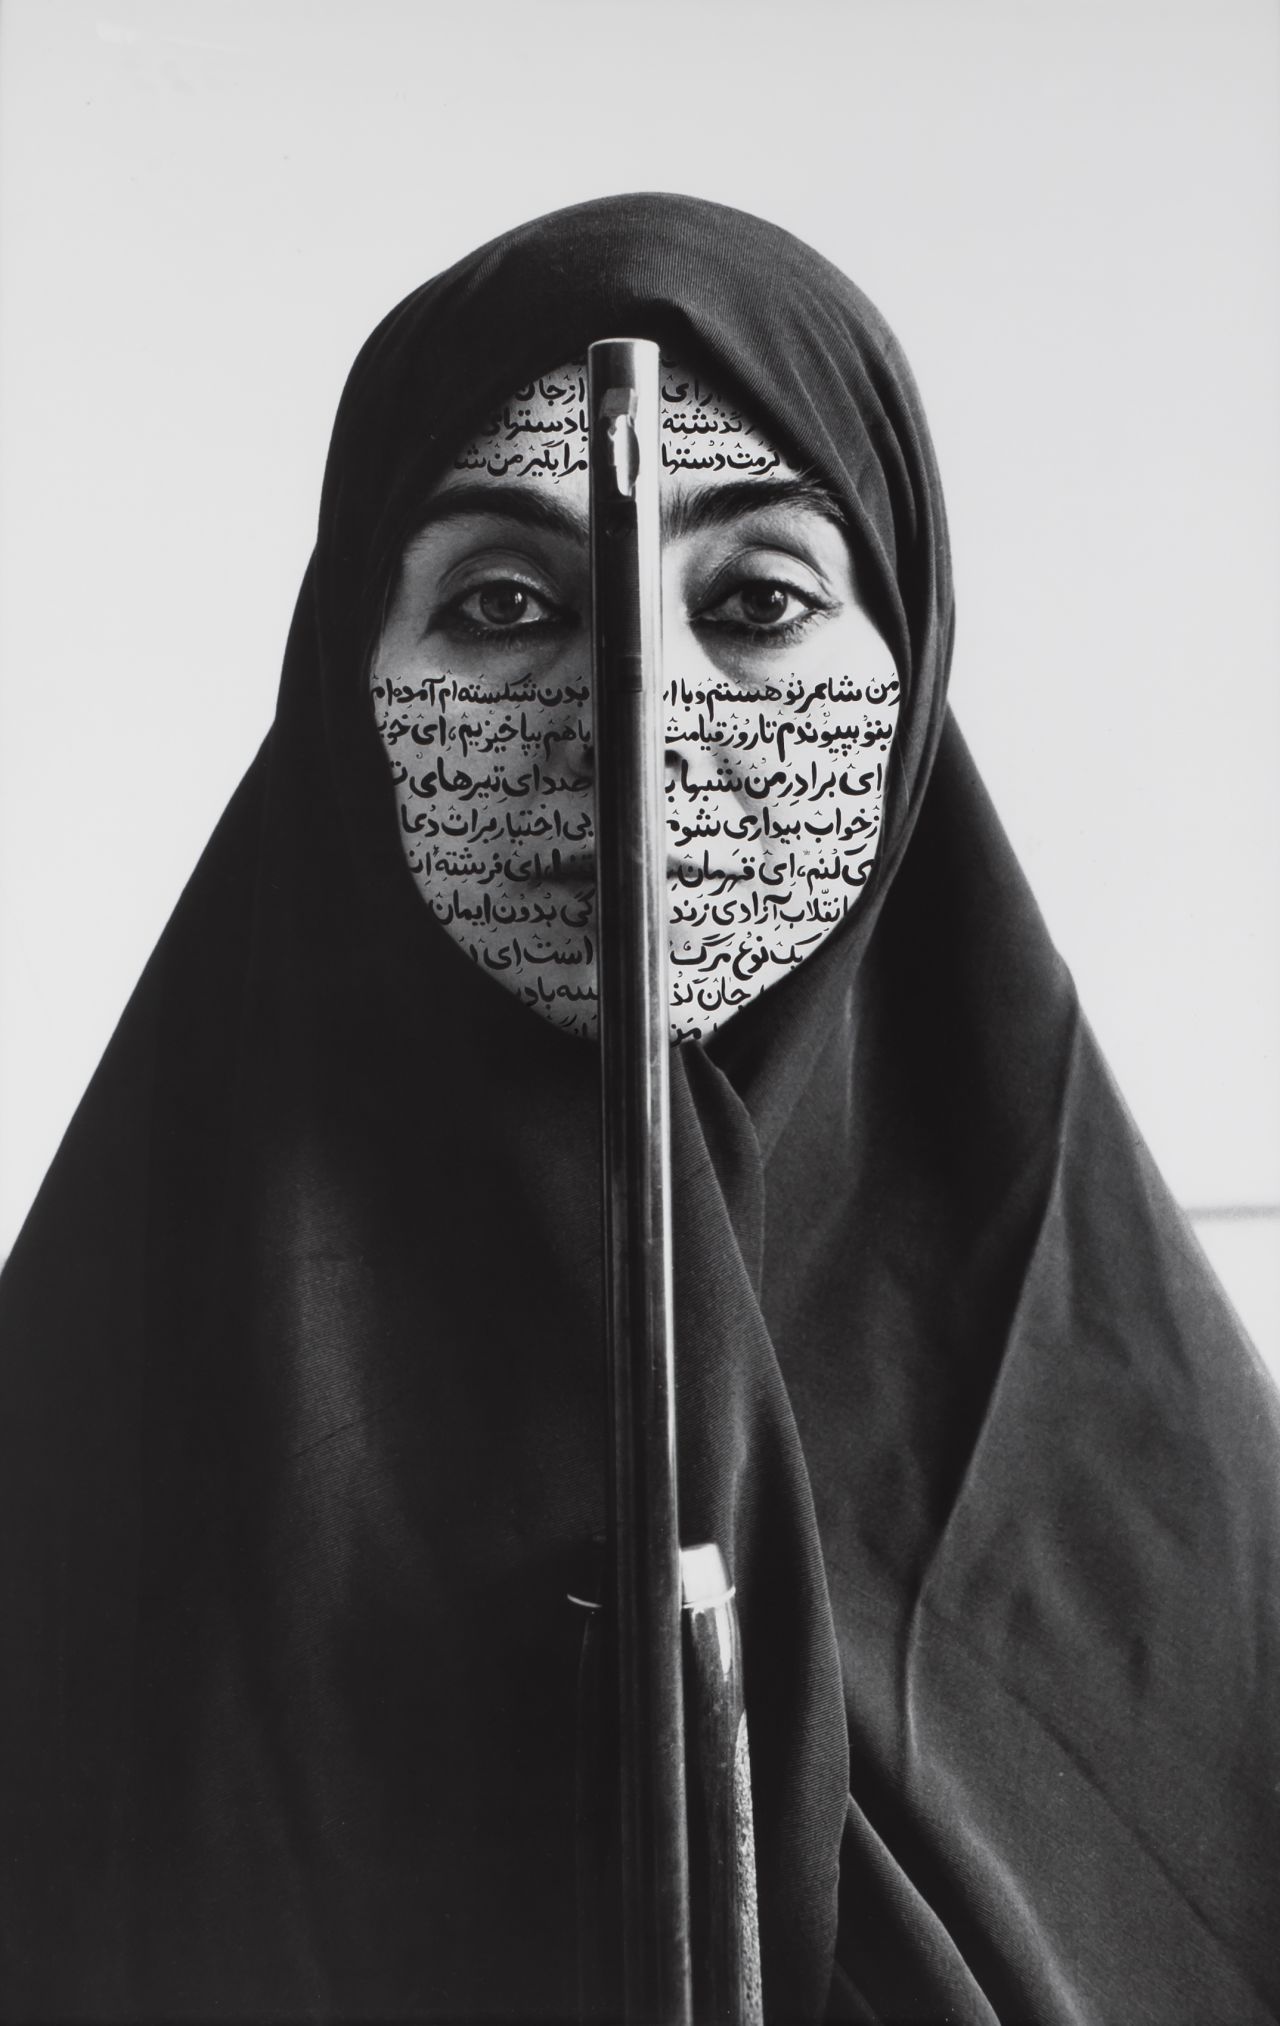 "Rebellious Silence" (1994) from the series "Women of Allah" showed the duality of poetry and sensuality with violence and repression.